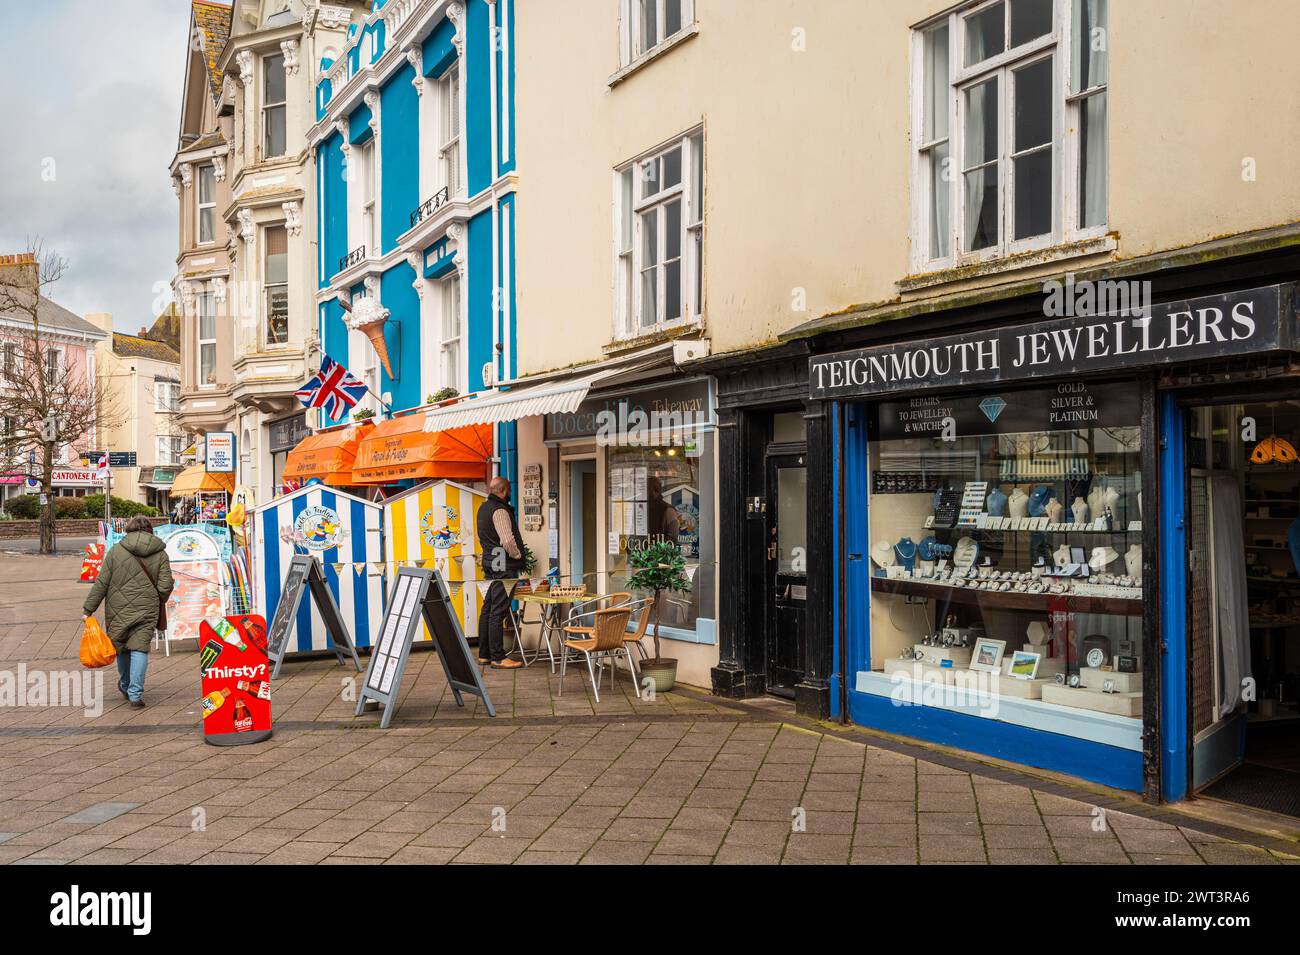 Teignmouth town centre shopping area with gift shop Two people and a gift shop and jewellers shop. Stock Photo